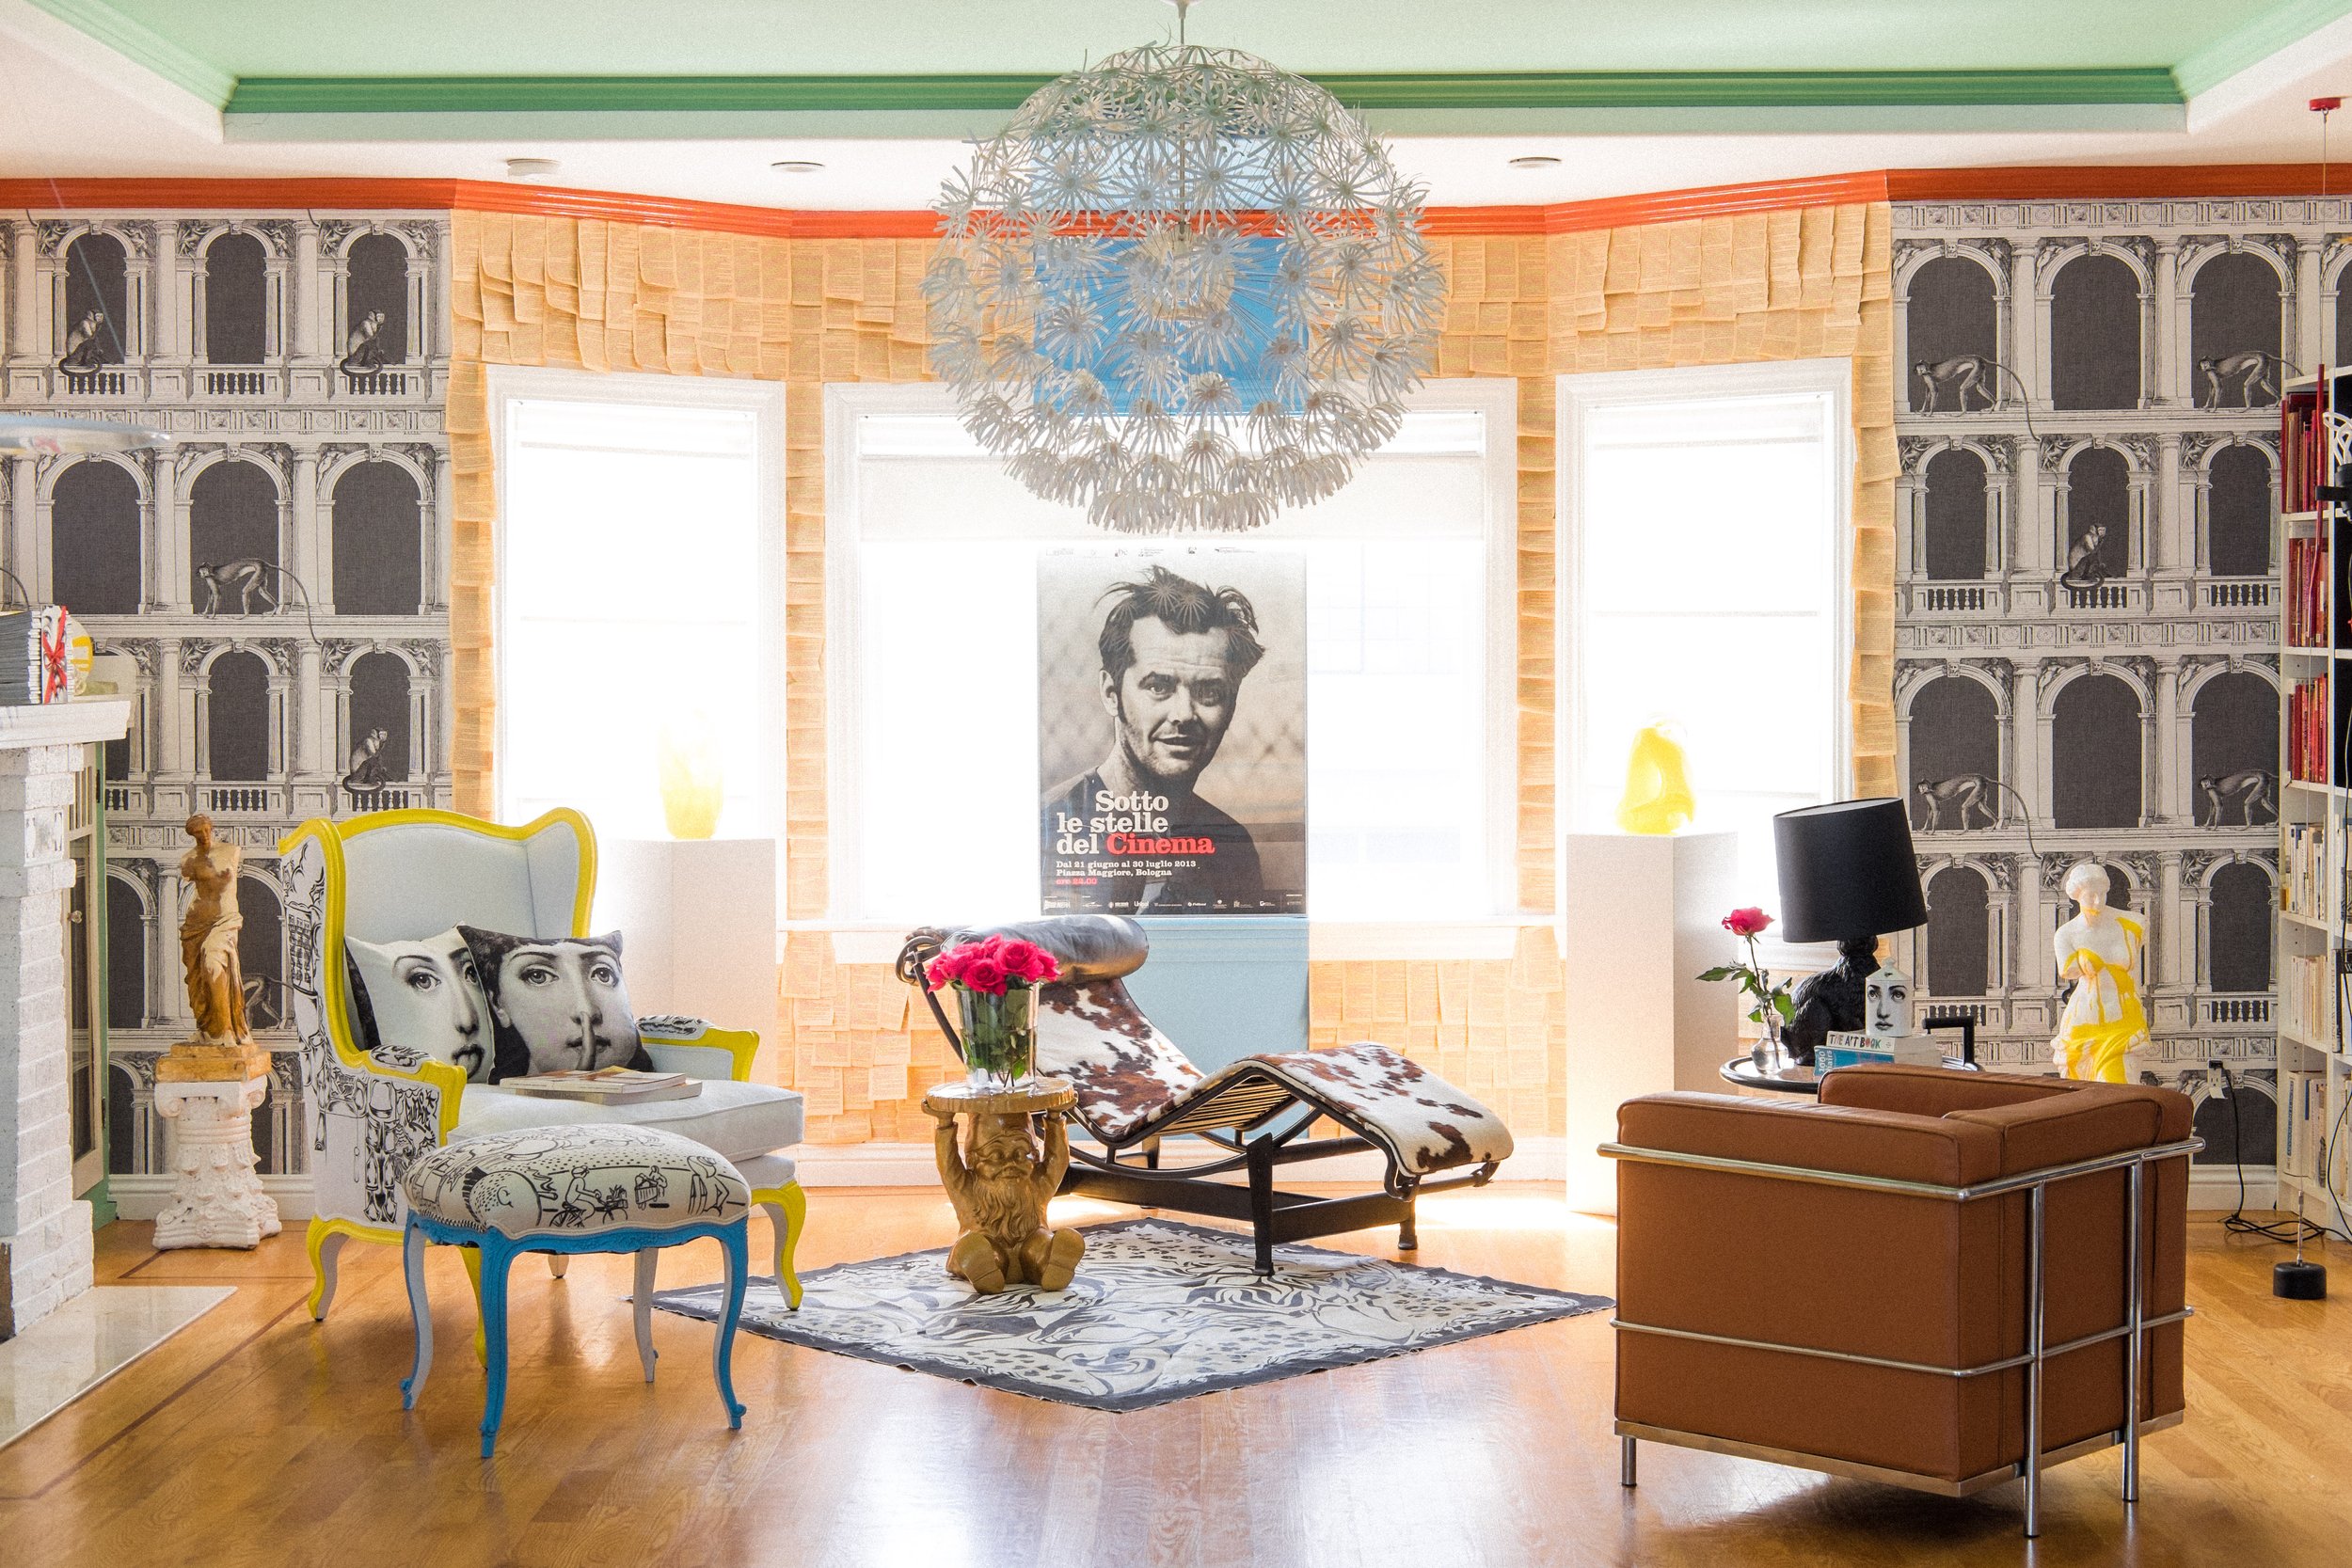 A vibrant room features eclectic furniture, bold wall art, a large dandelion-inspired chandelier, and a mix of classic and modern decor, including statues and patterned chairs.